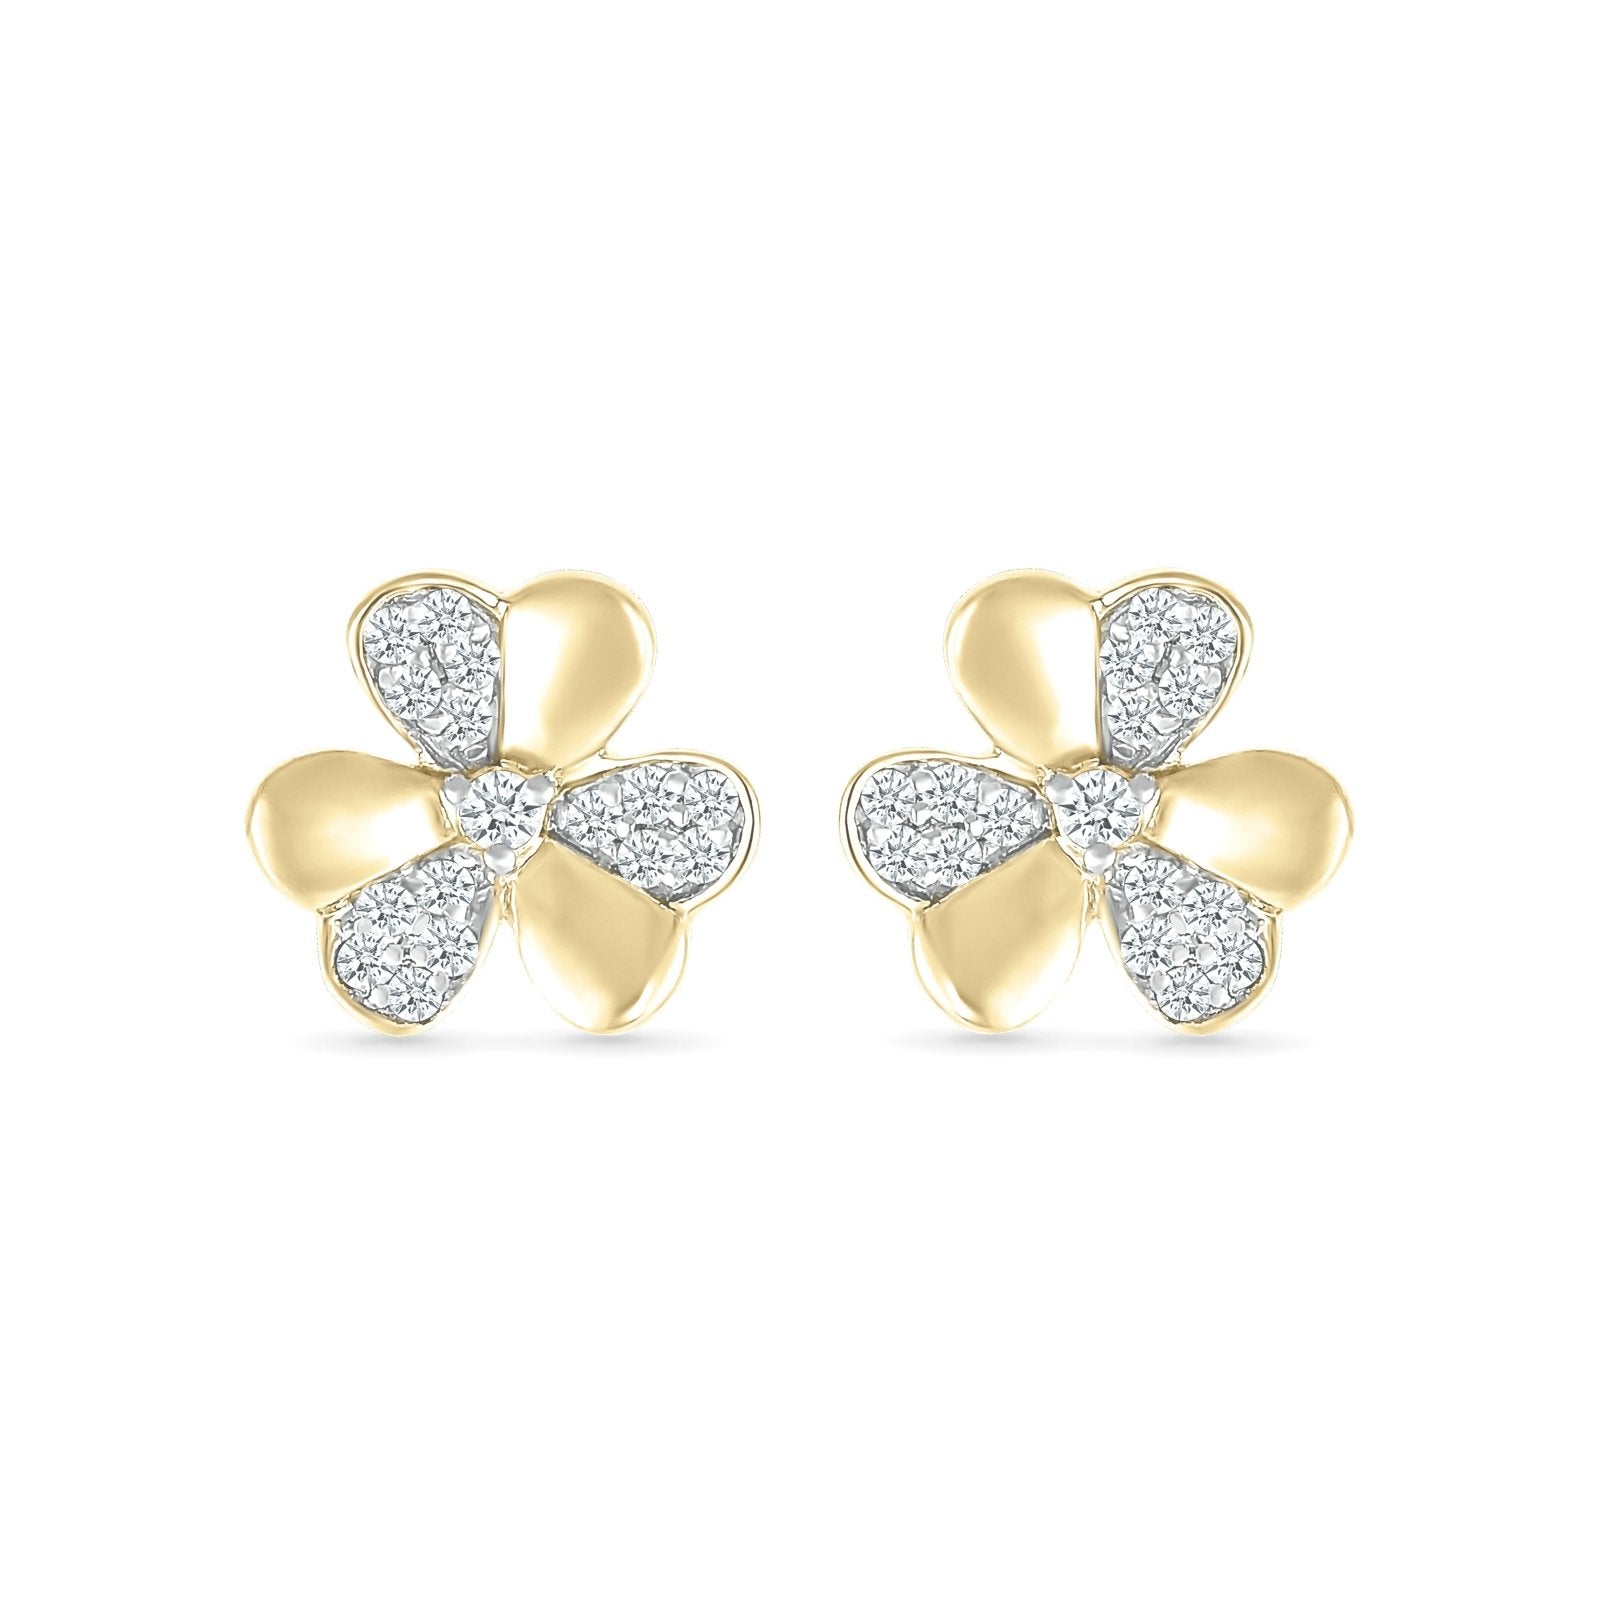 Diamond 3 Petal Lucky Clover Stud Earrings Earrings Estella Collection #product_description# 32672 10k April Birthstone Colorless Gemstone #tag4# #tag5# #tag6# #tag7# #tag8# #tag9# #tag10#